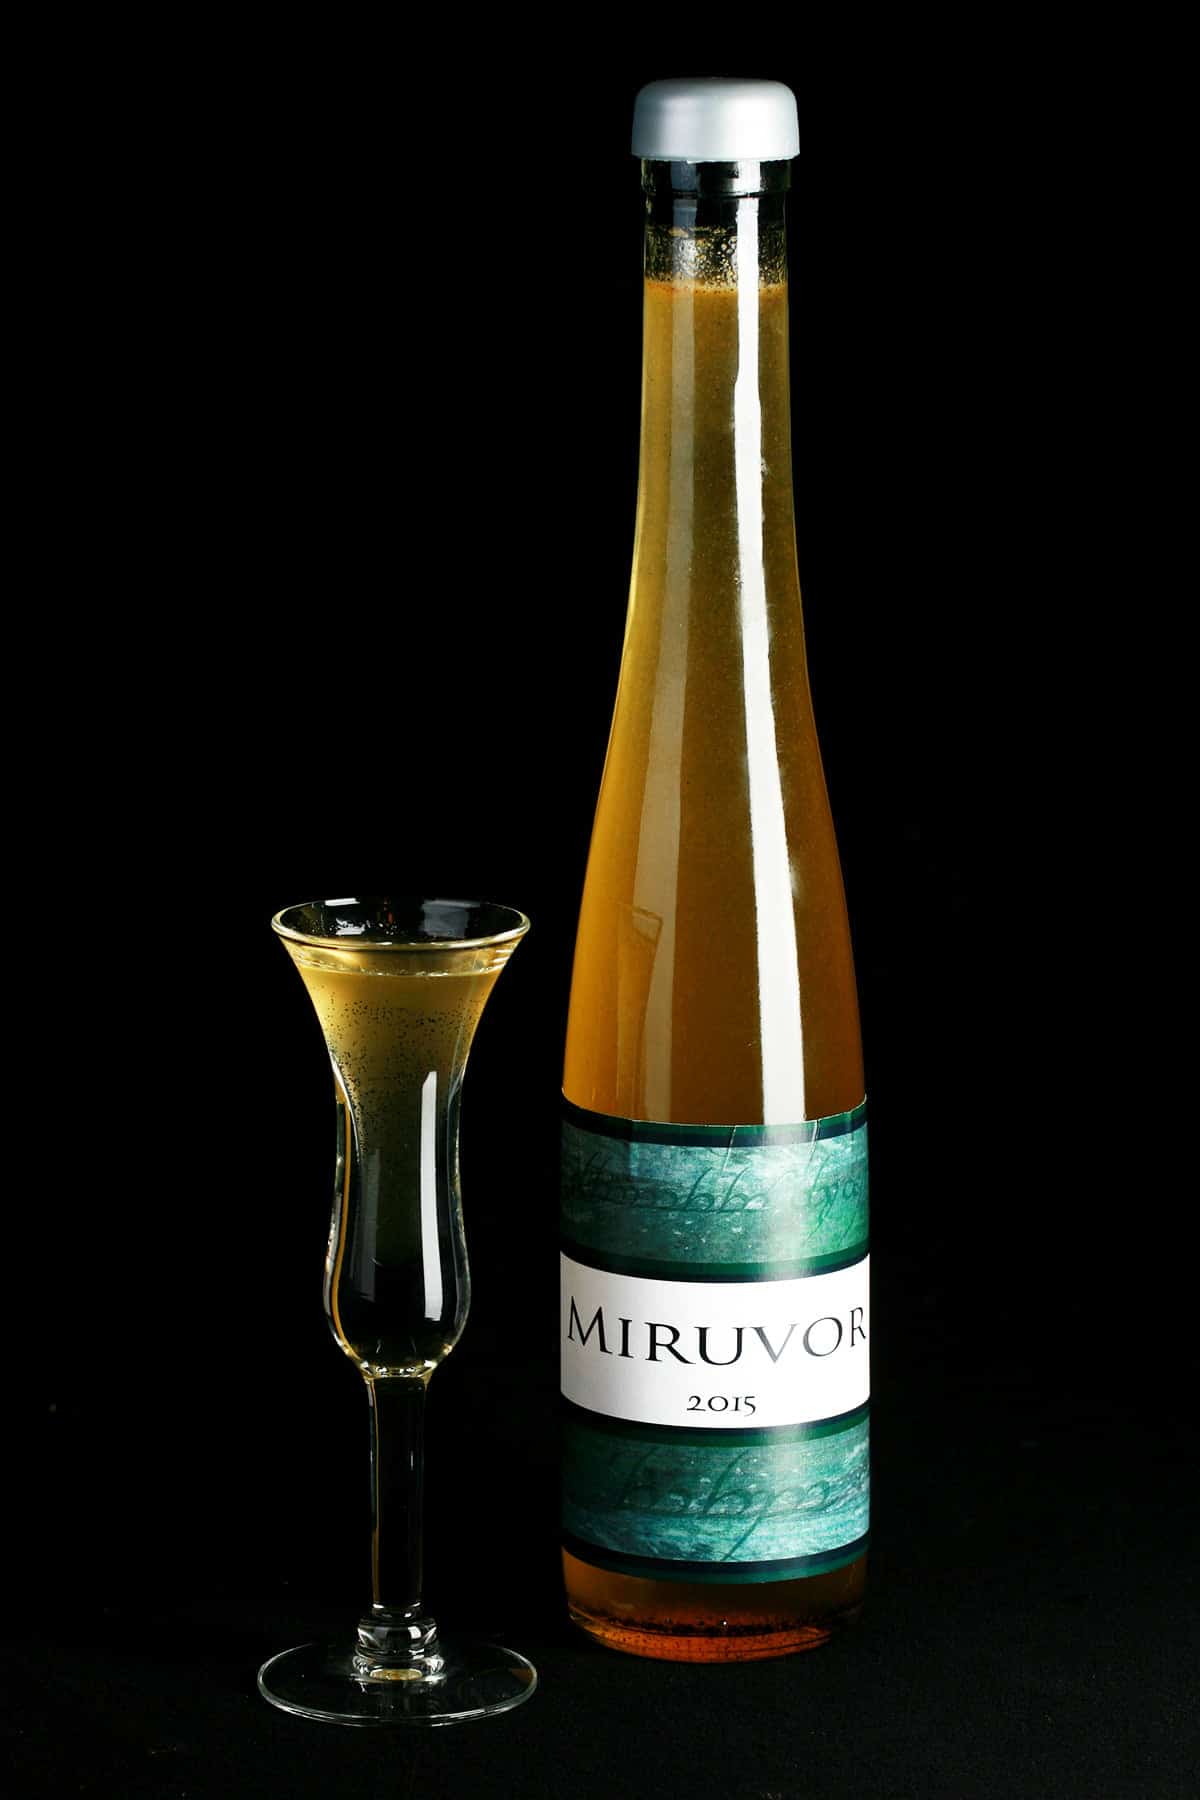 A tall, slender wine bottle filled with a straw coloured liqueur is pictured next to a fluted shot glass filled with the same.